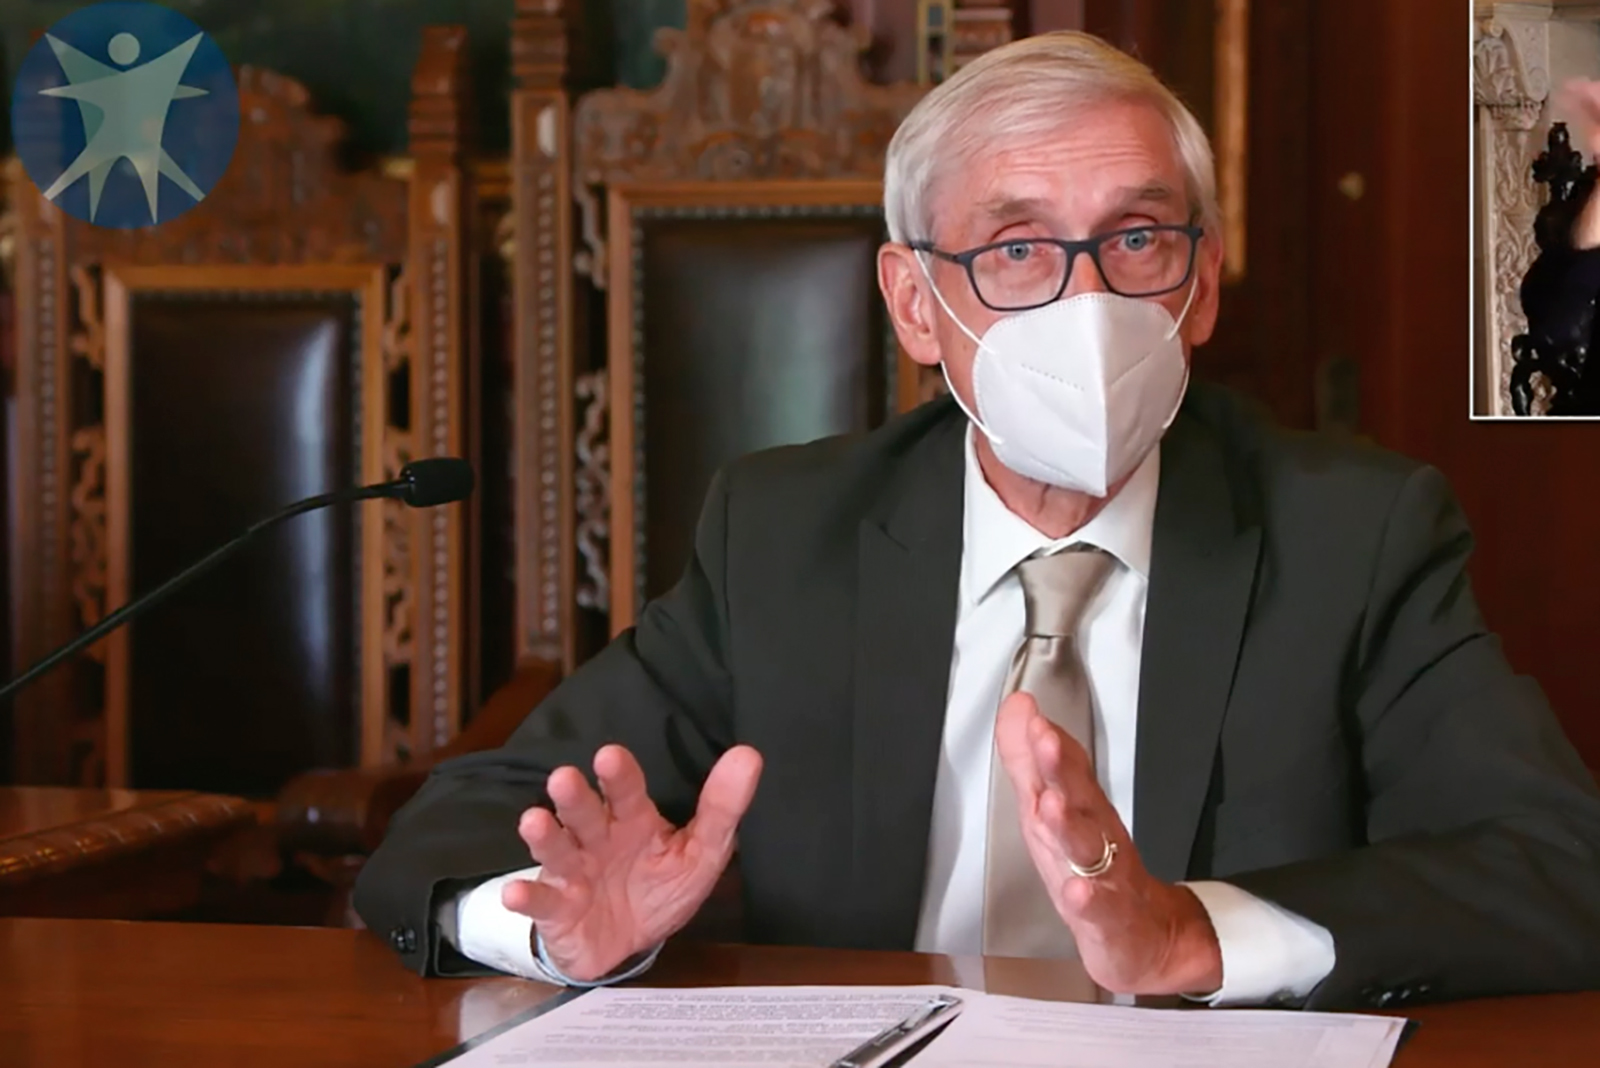 This image taken from video by the Wisconsin Department of Health Services shows Wisconsin Gov. Tony Evers on July 30, in Madison, Wisconsin.